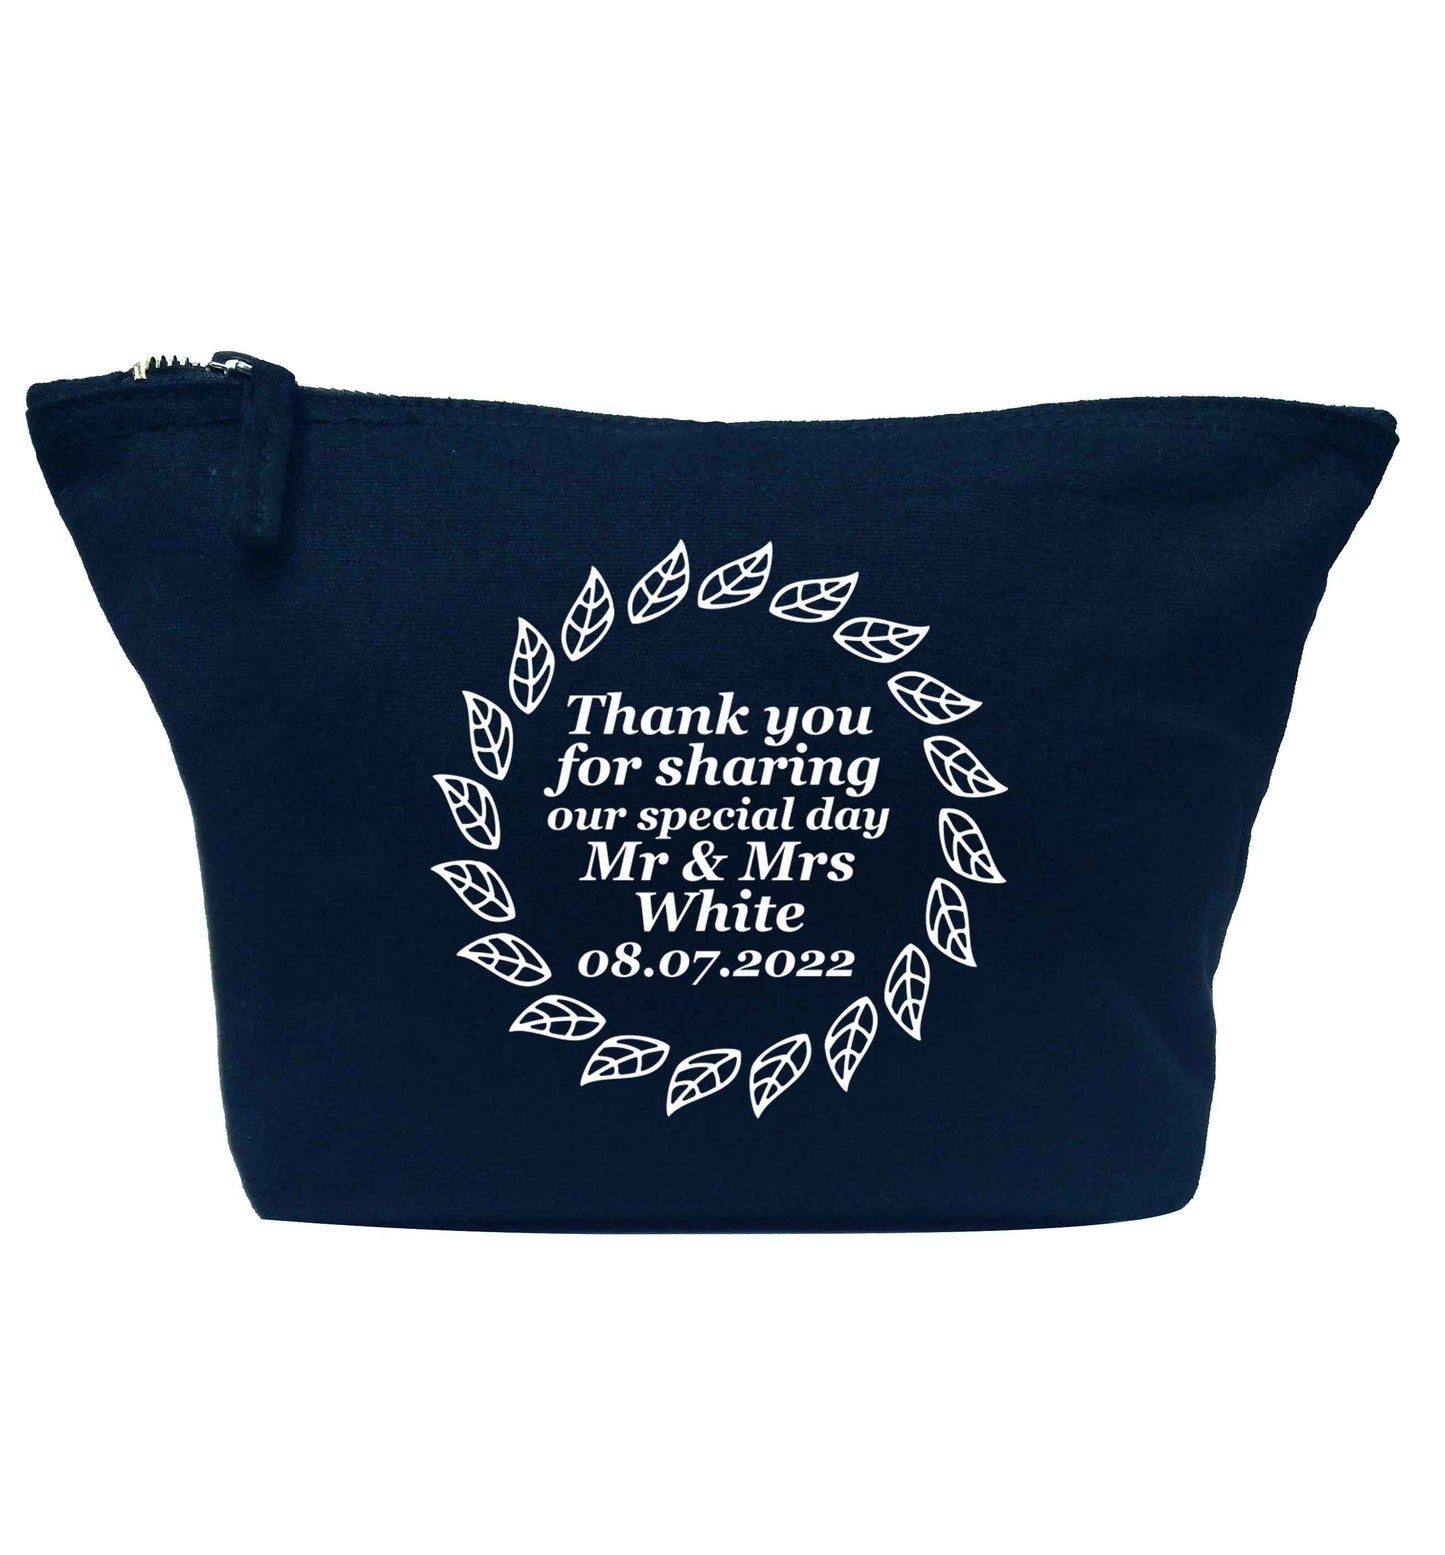 Personalised wedding thank you's Mr and Mrs wedding and date! Ideal wedding favours! navy makeup bag